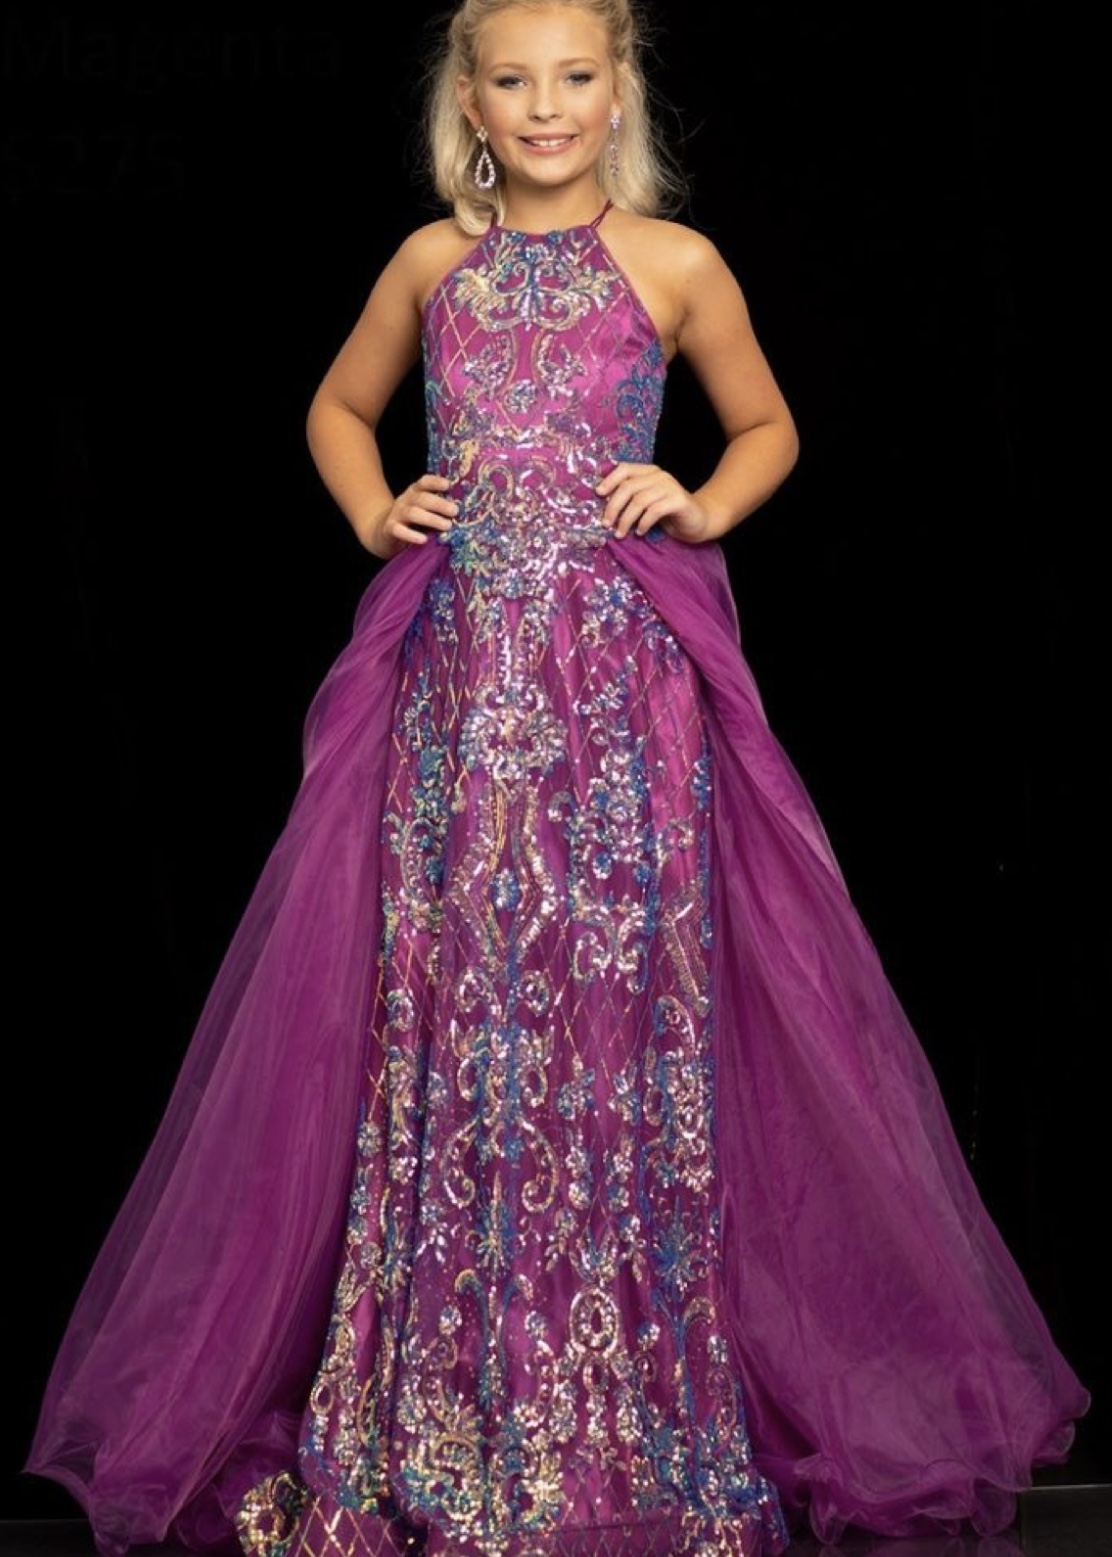 50 Best Prom Dresses for 10 to 14 Years Old Girls - Plus Size Women Fashion